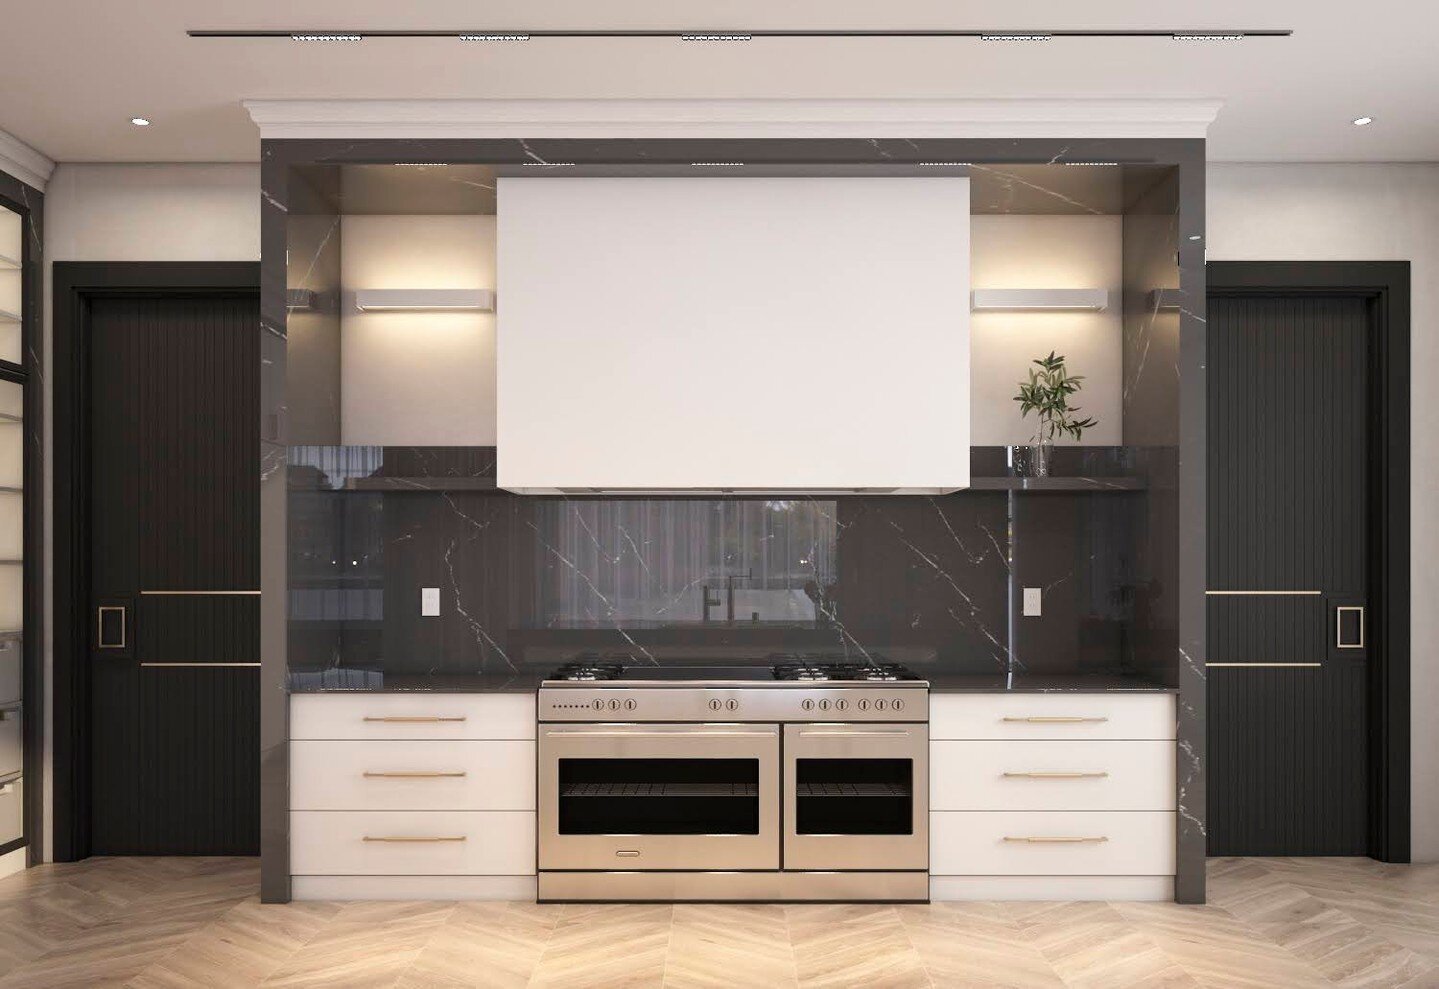 Upcoming Modern Kitchen in Forest Hill South, Toronto 🌳

High Style, High Performance: PARVIZ&rsquo;s Modern Kitchen System. The elegant yet highly functional custom kitchen system transforms storage space into an aesthetic social point.

Book your 